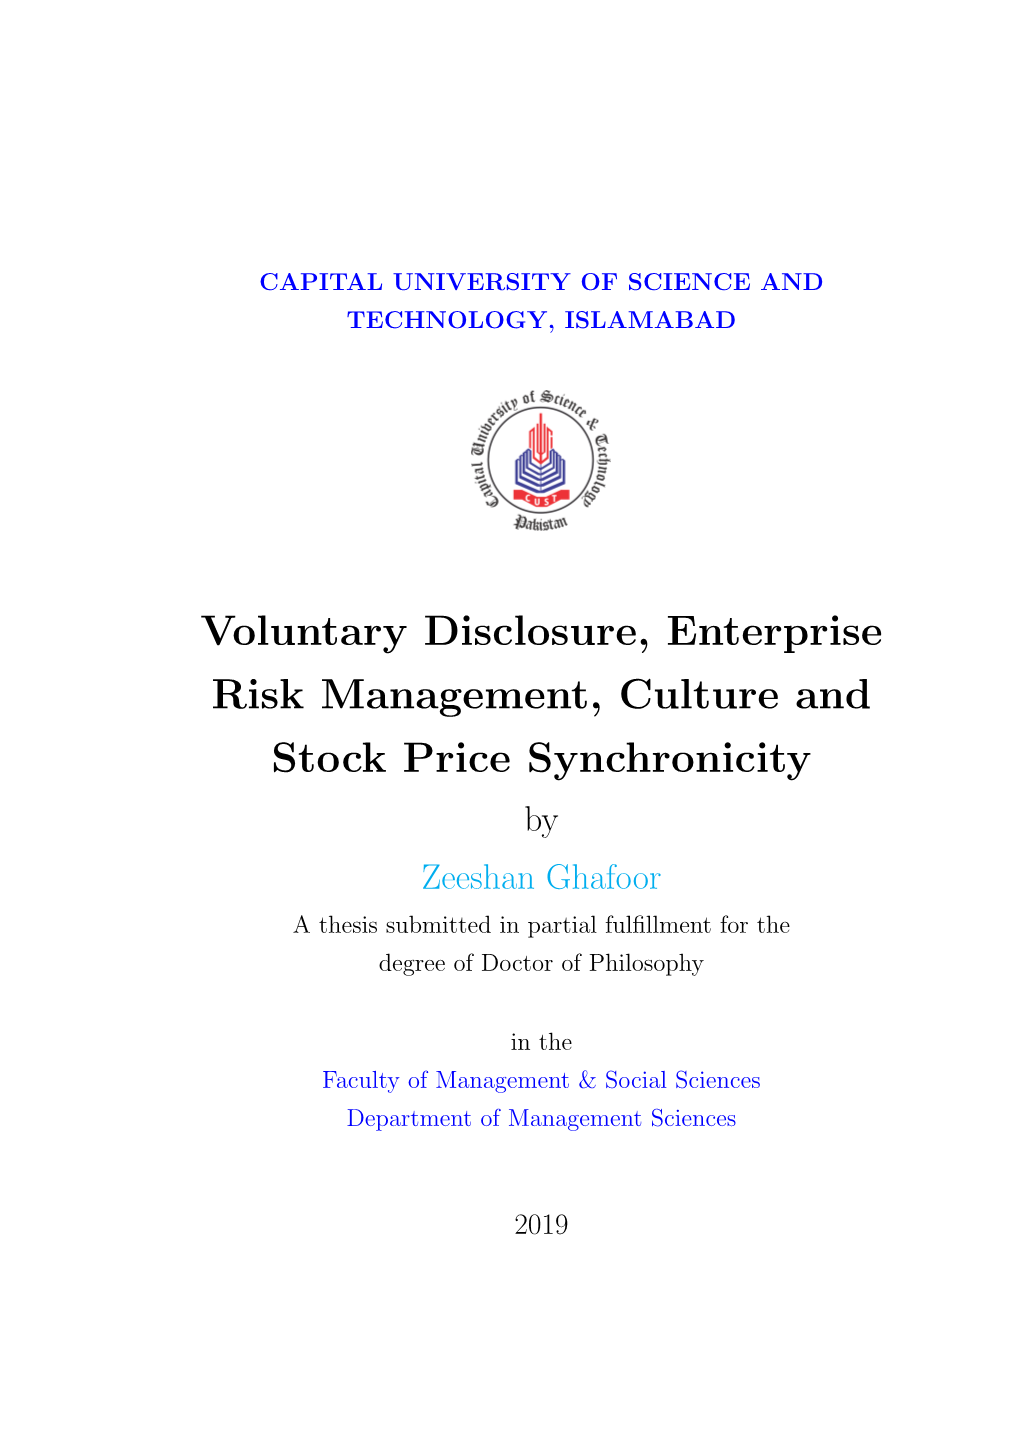 Voluntary Disclosure, Enterprise Risk Management, Culture and Stock Price Synchronicity